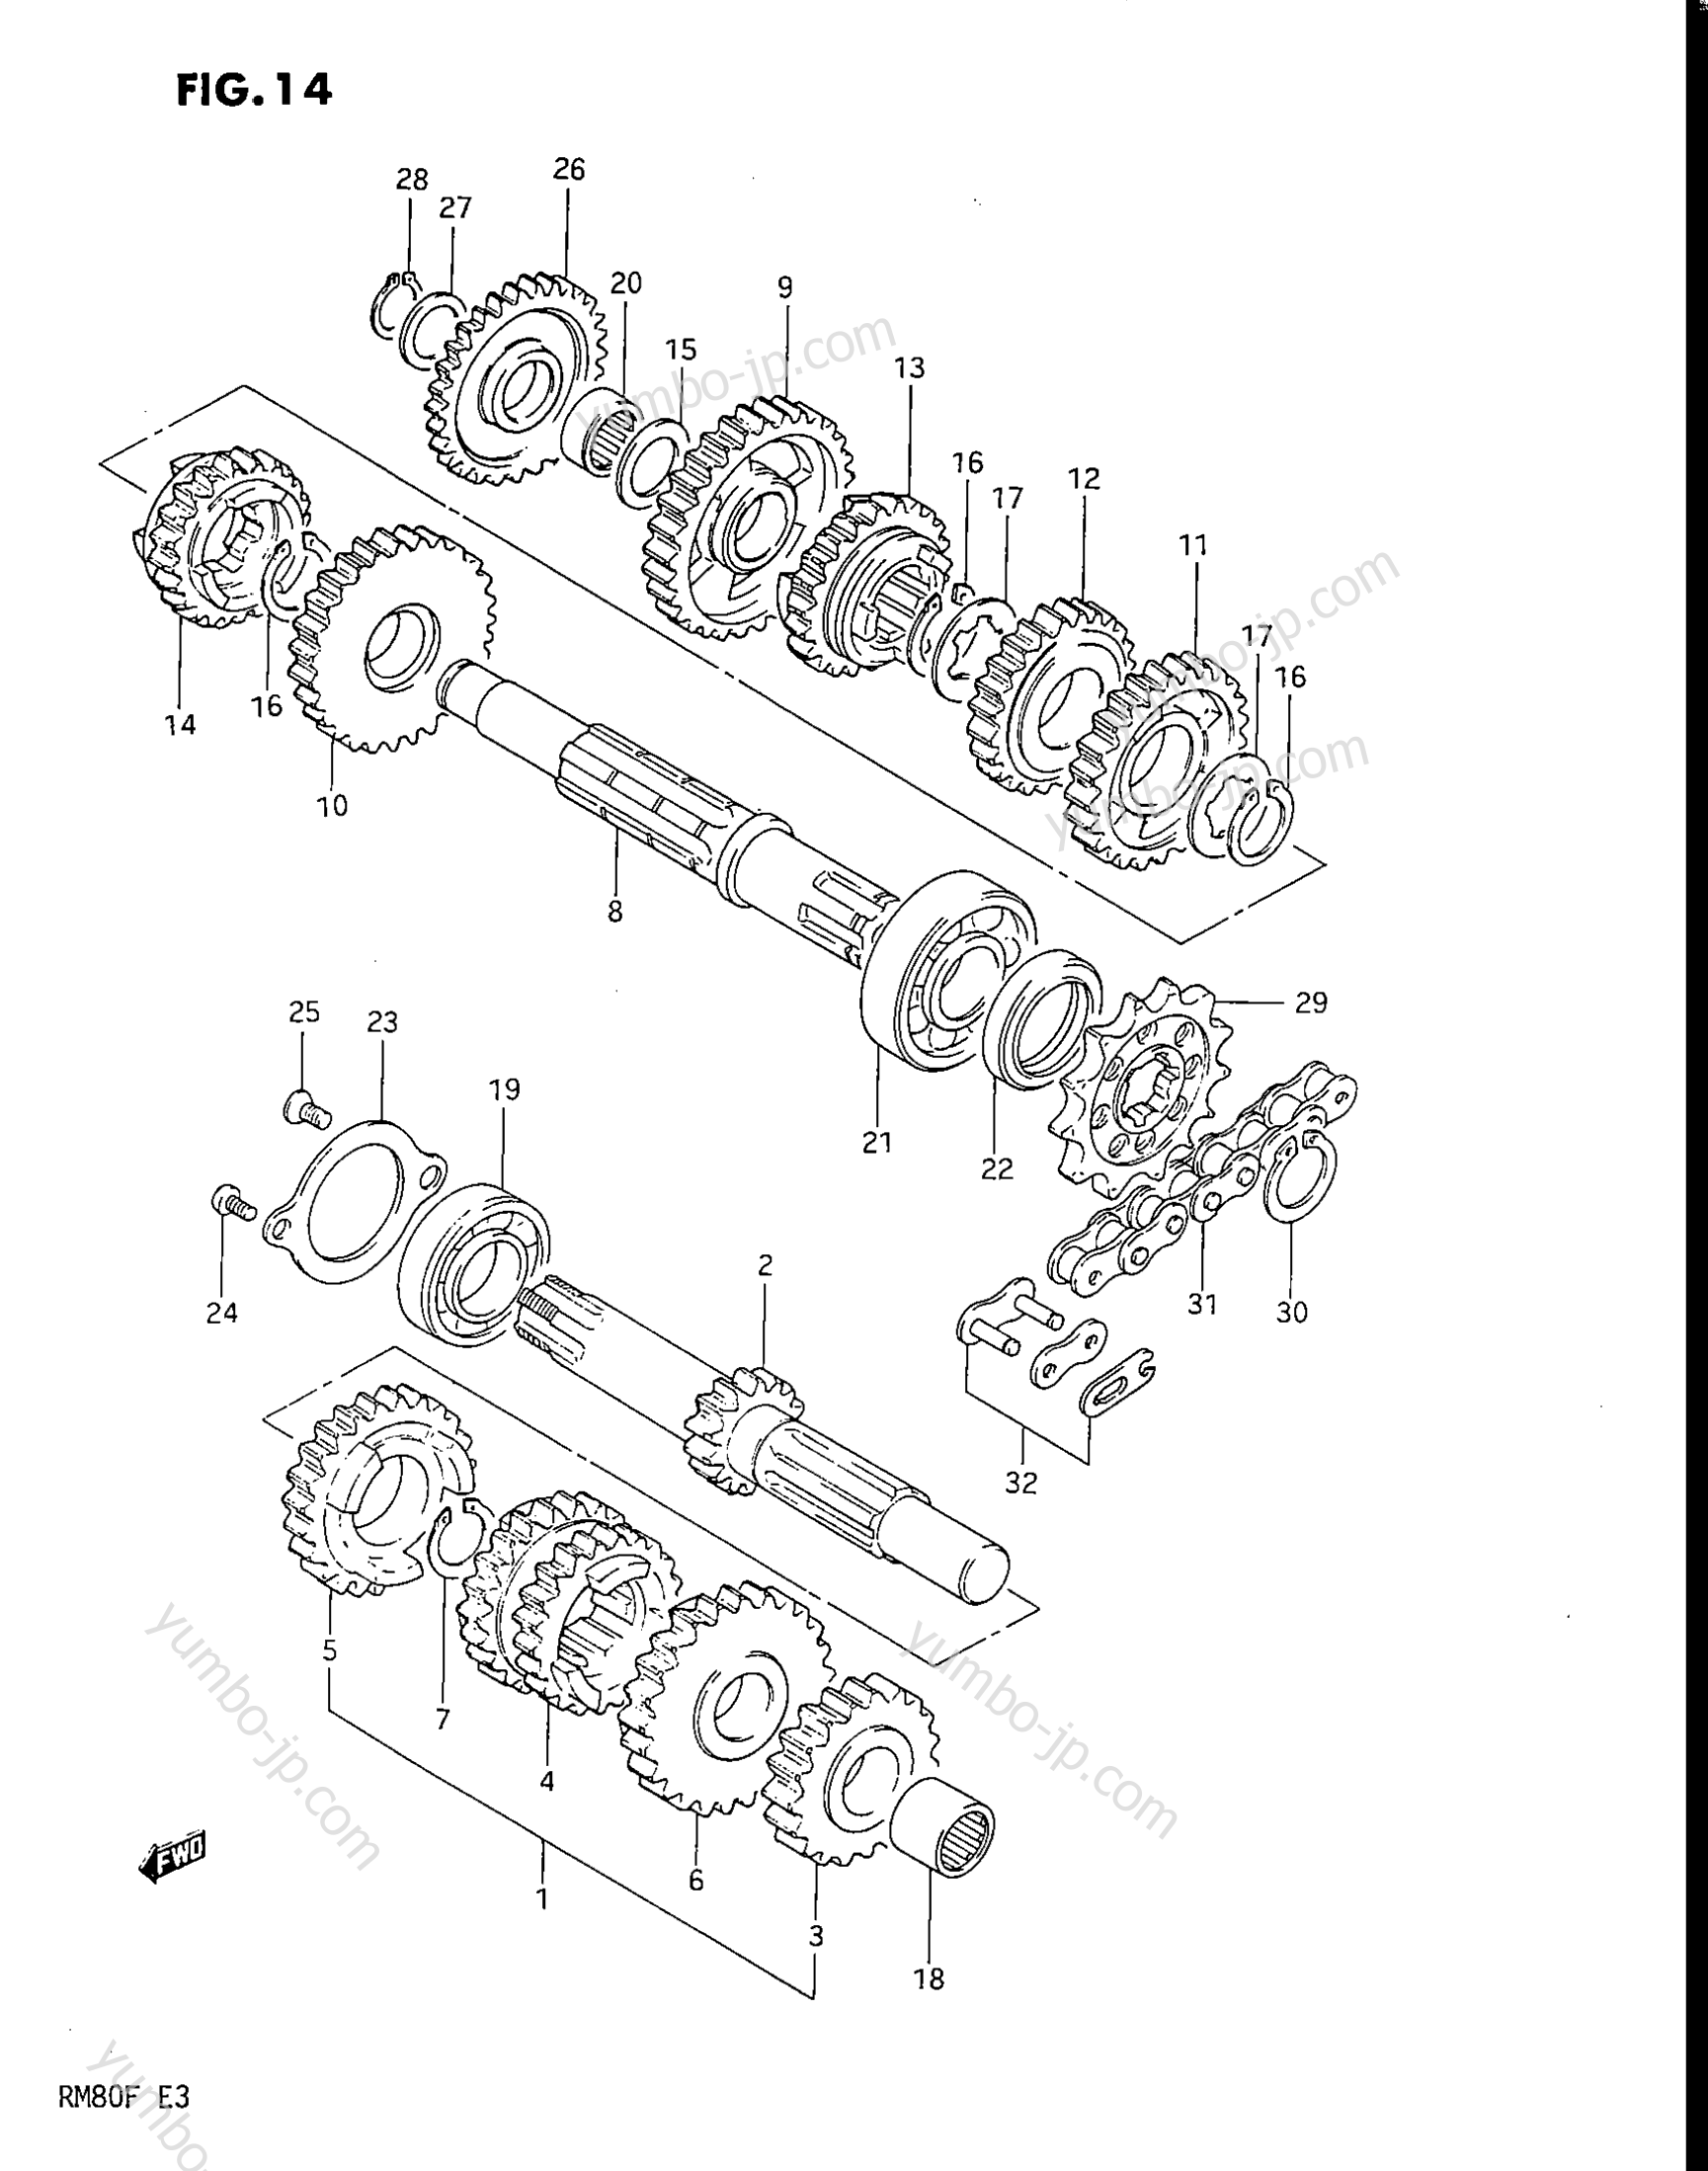 TRANSMISSION (MODEL E/F) for motorcycles SUZUKI RM80 1983 year